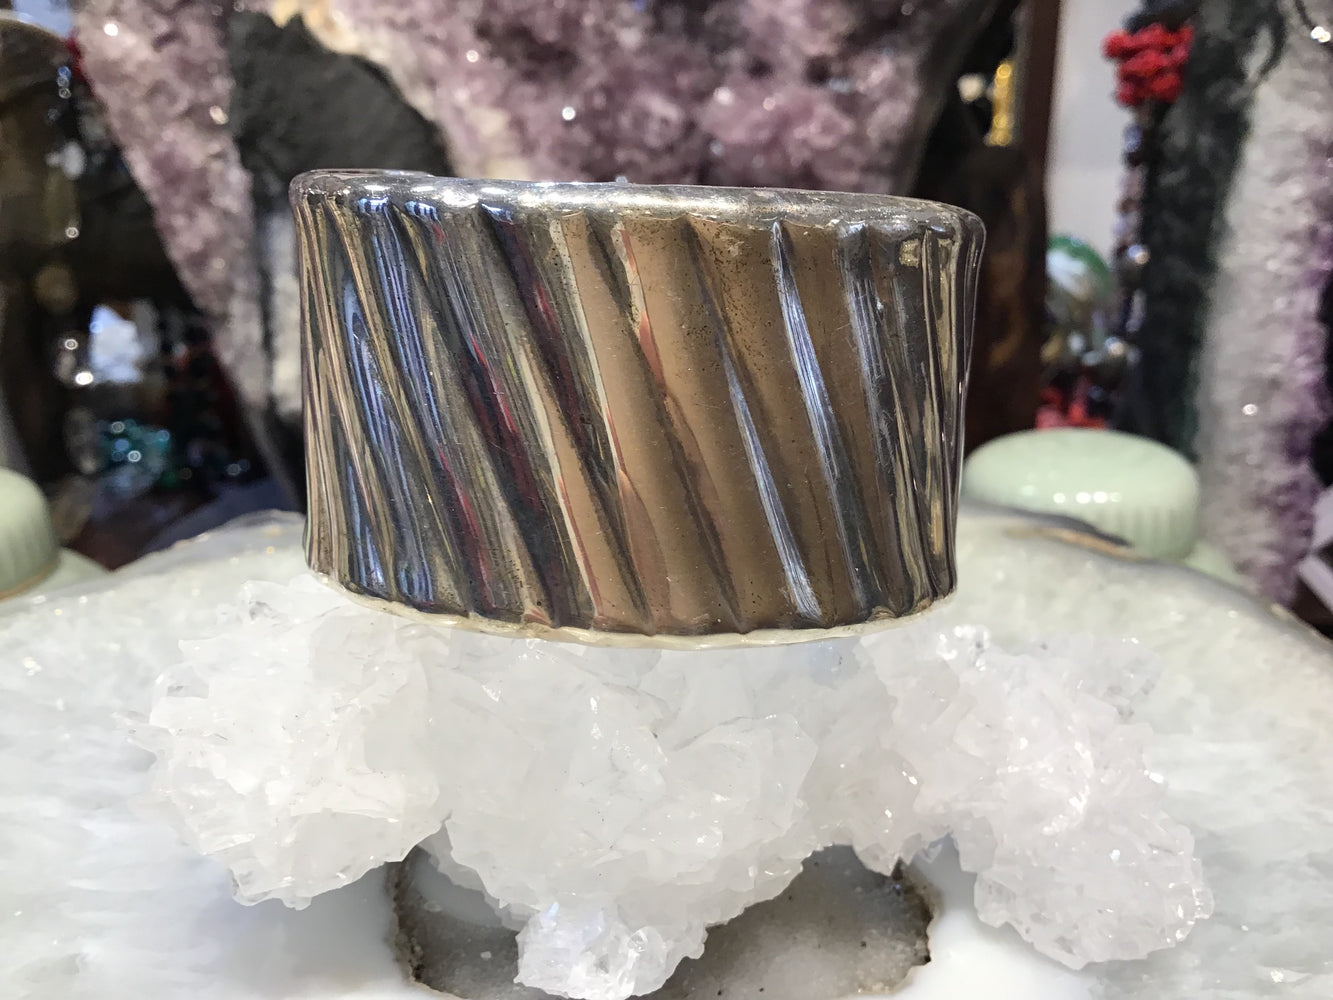 Vintage Mexican sterling silver cuff bracelet